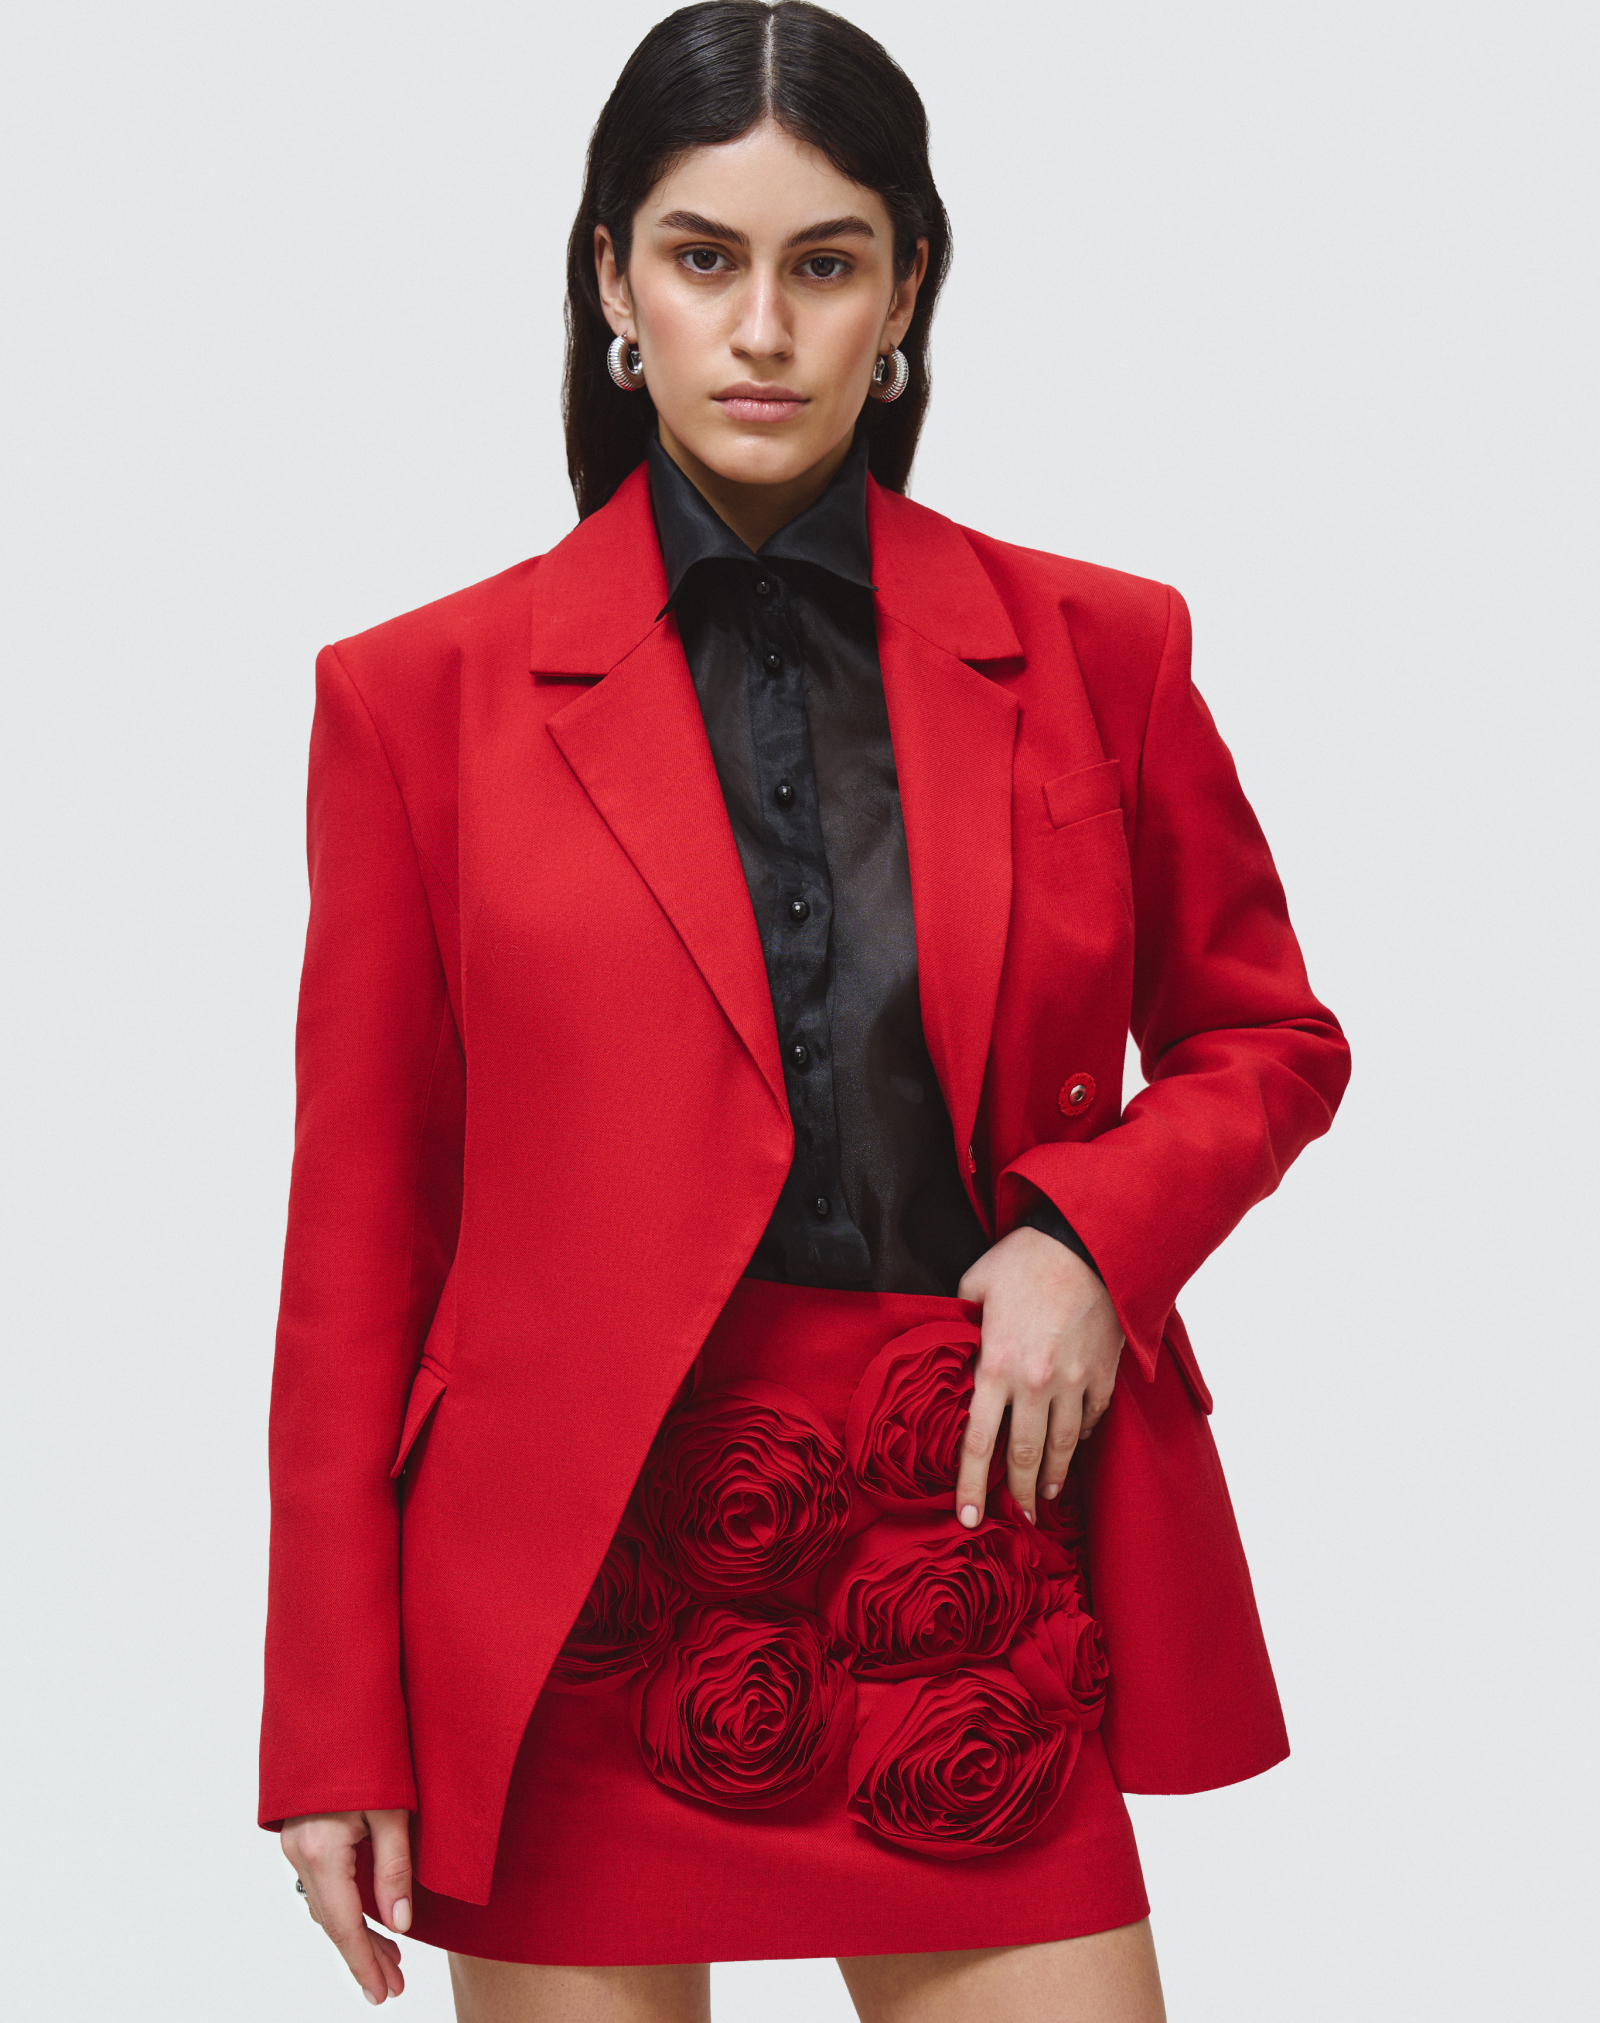 Red asymmetrical jacket with wide shoulders